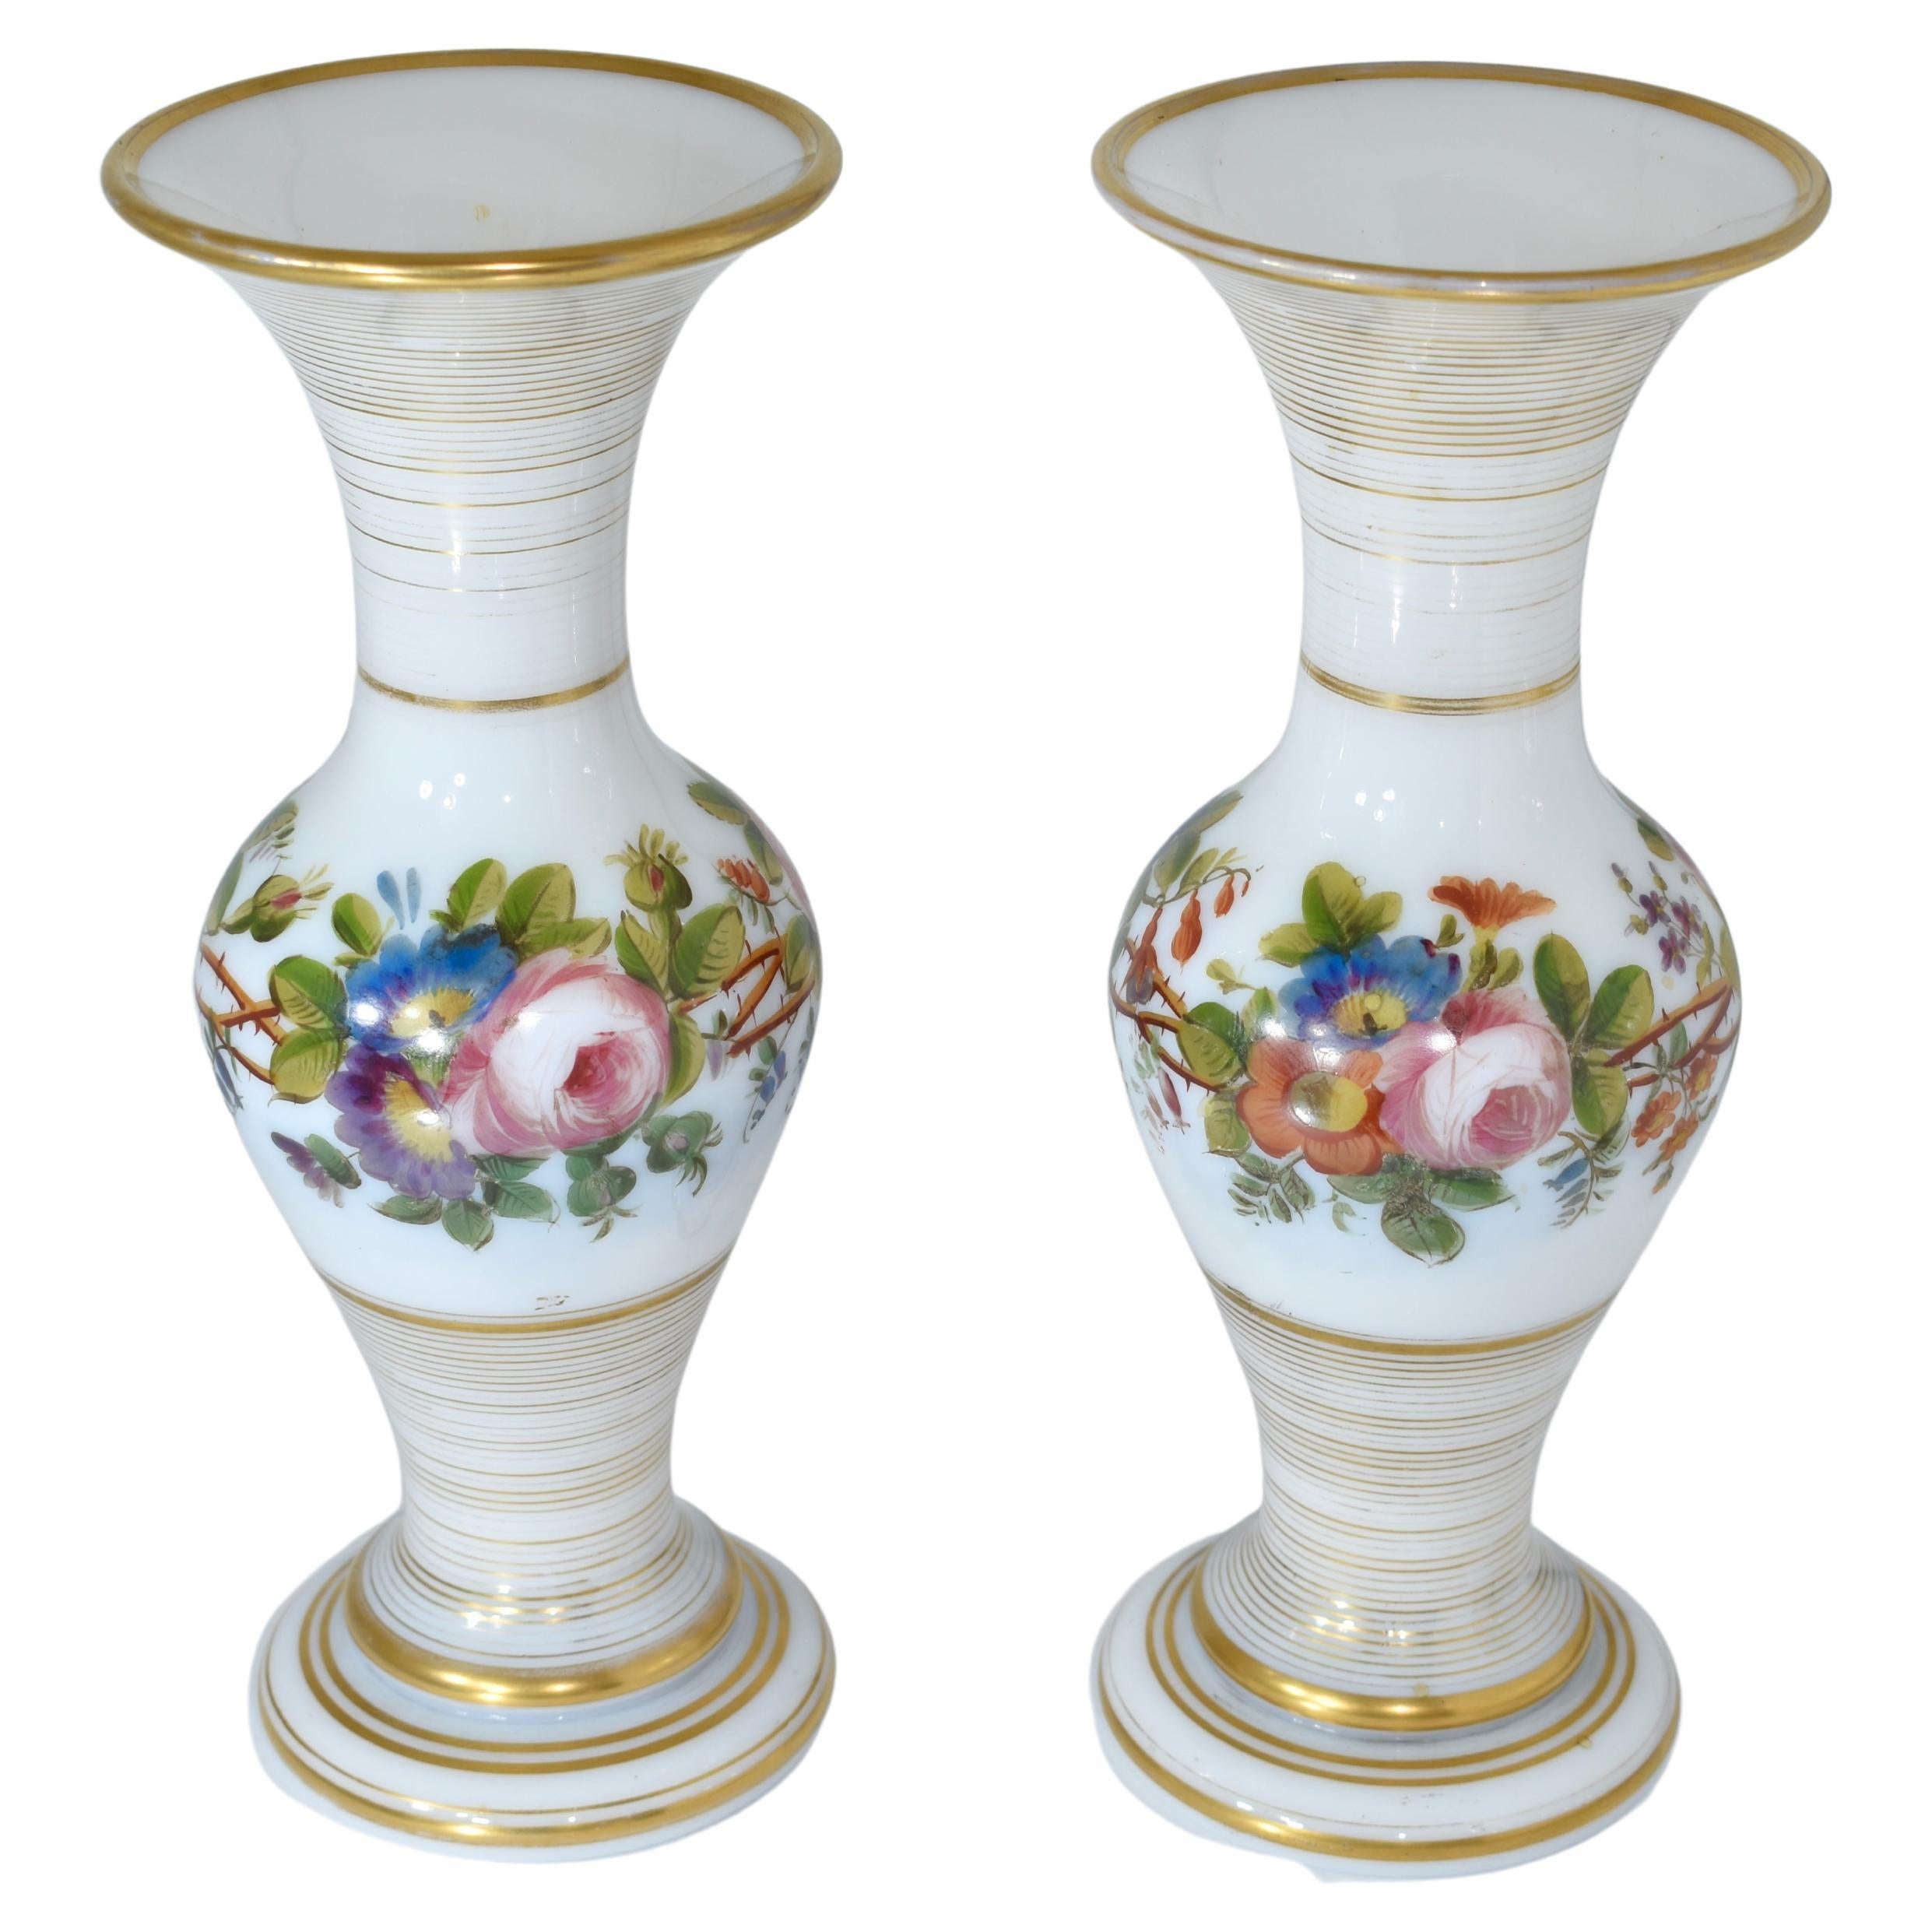 Antique Pair of Vases, French Opaline by Baccarat, 19th Century In Good Condition For Sale In Rostock, MV